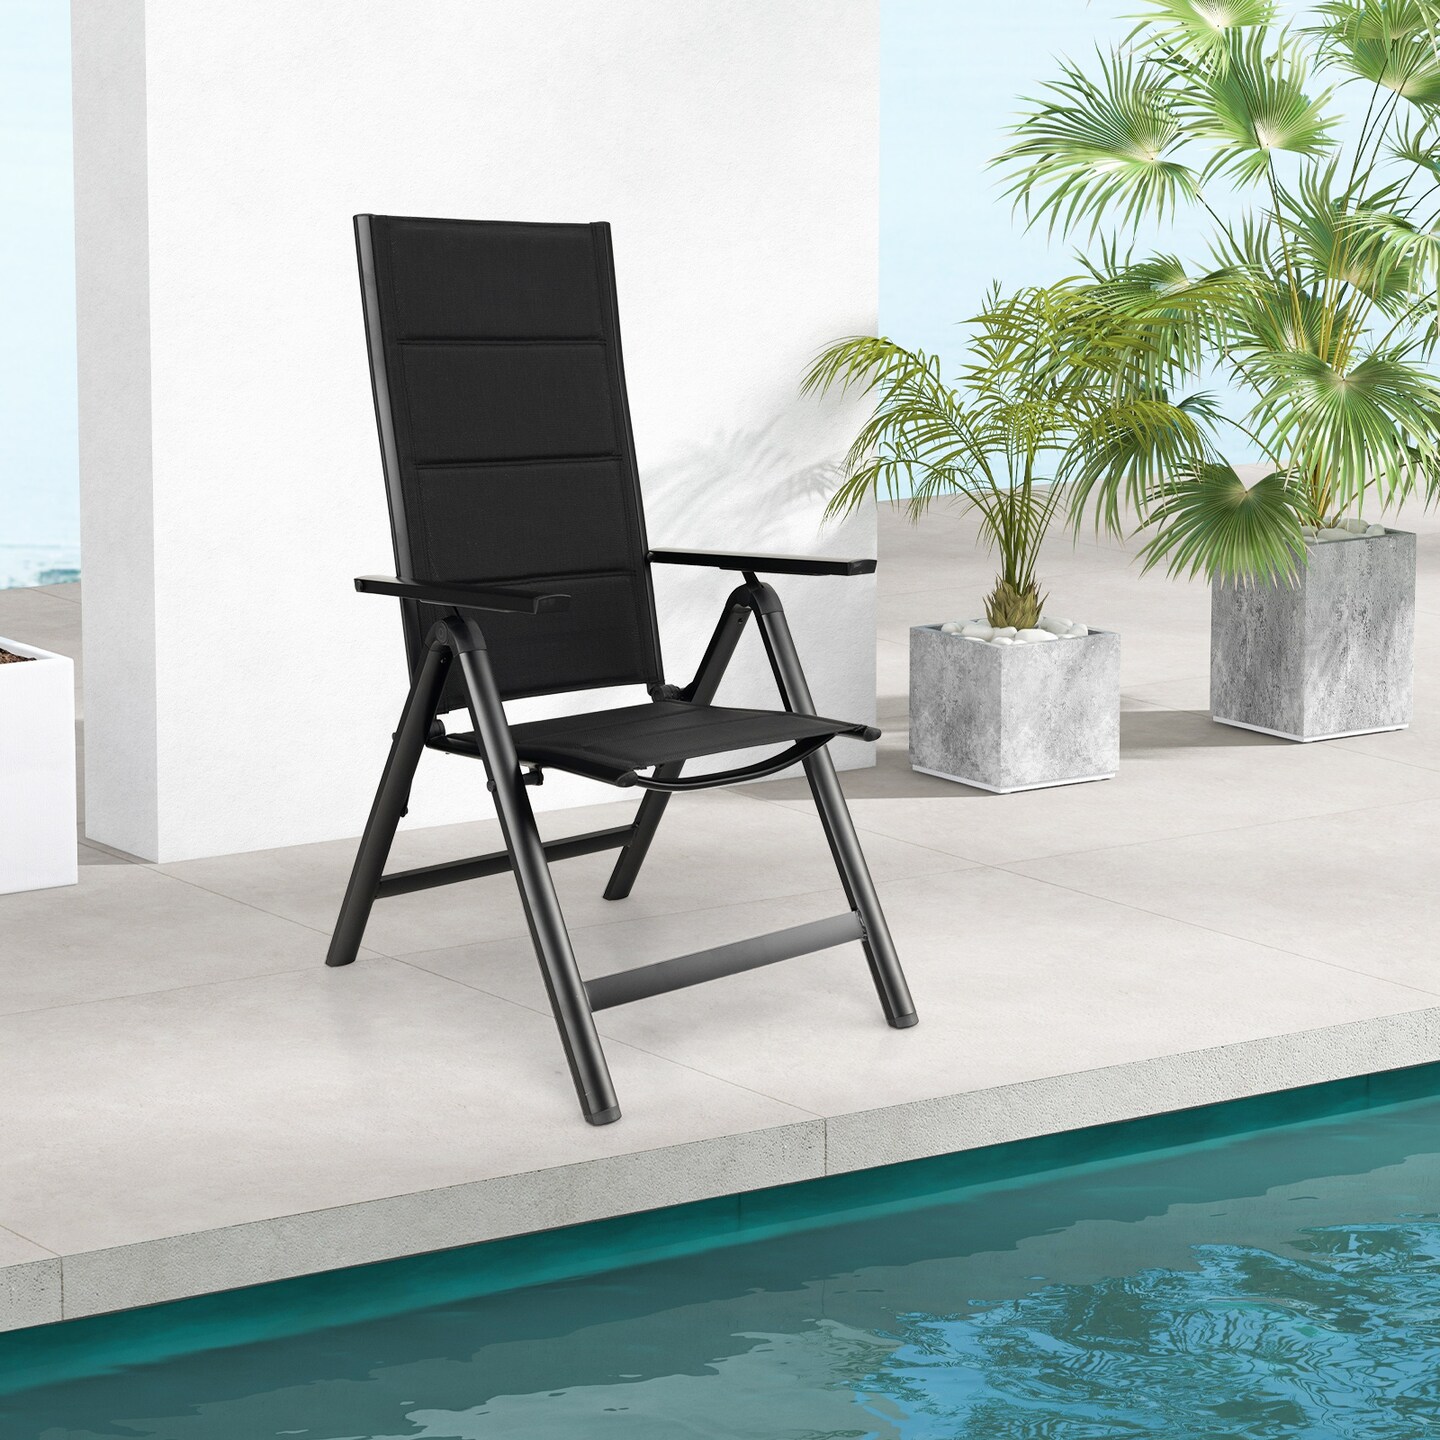 Outdoor Dining Chair With Soft Padded Seat And 7-position Adjustable Backrest